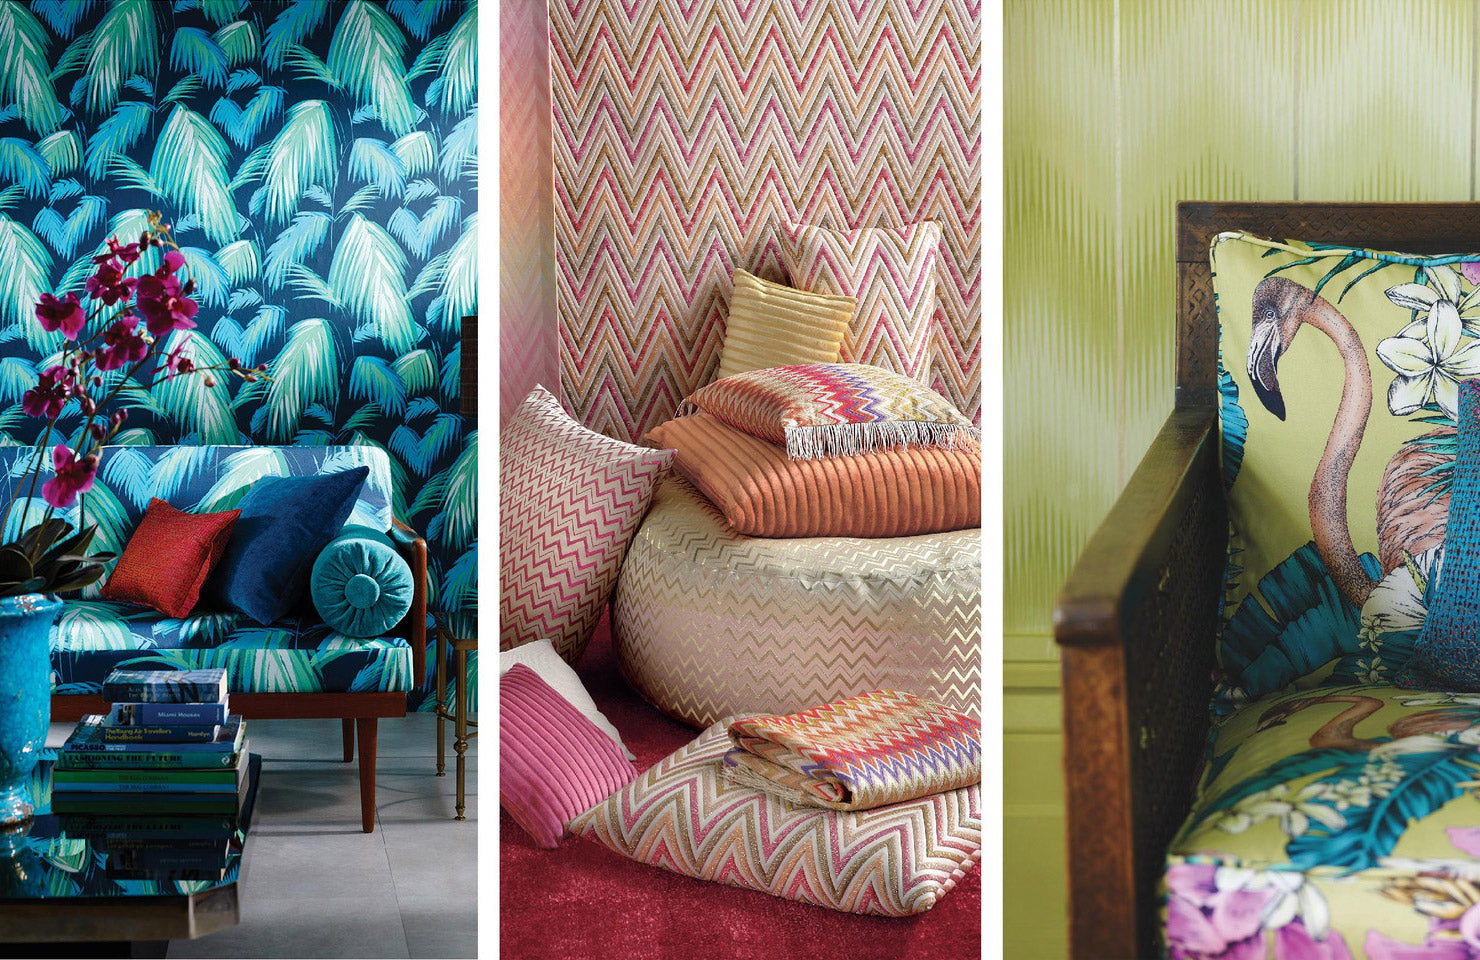 Soft furnishings and Wall coverings